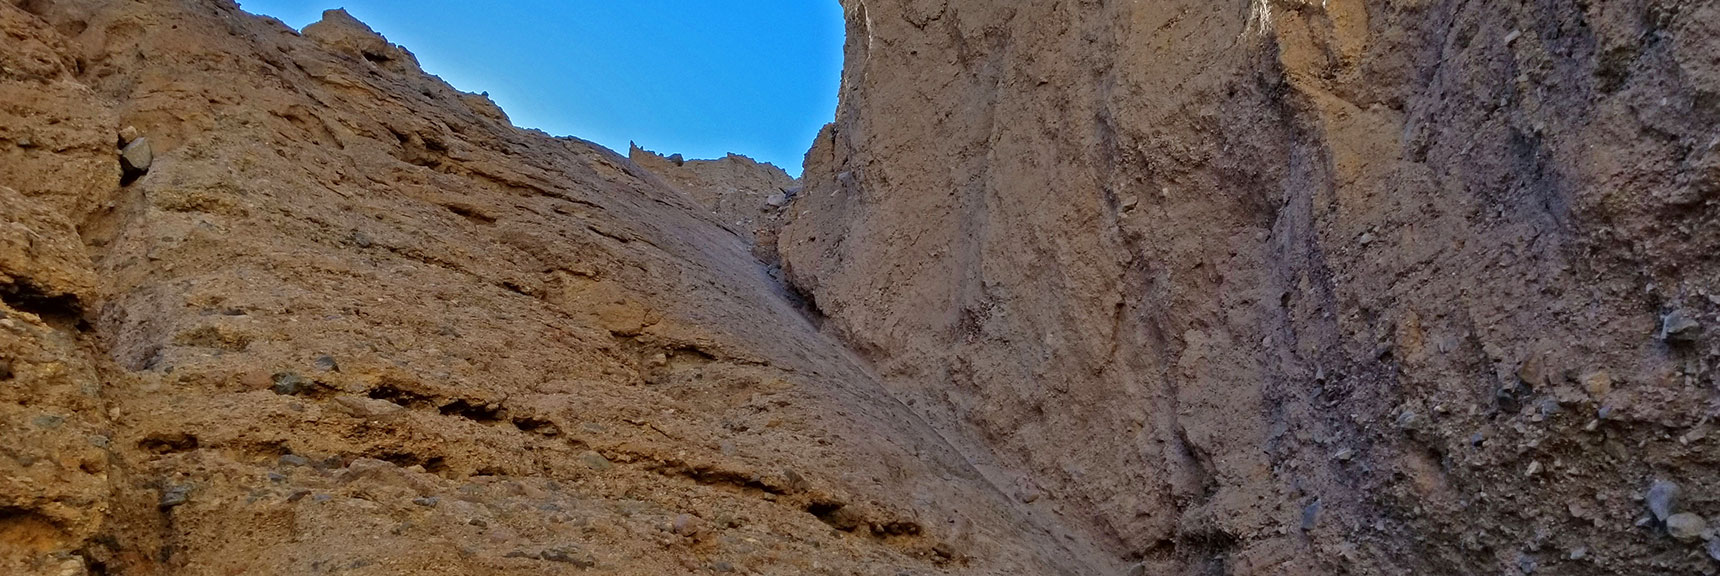 60 Degree Slab Marks End of Third Unofficial Slot | Sidewinder Canyon | Death Valley National Park, California